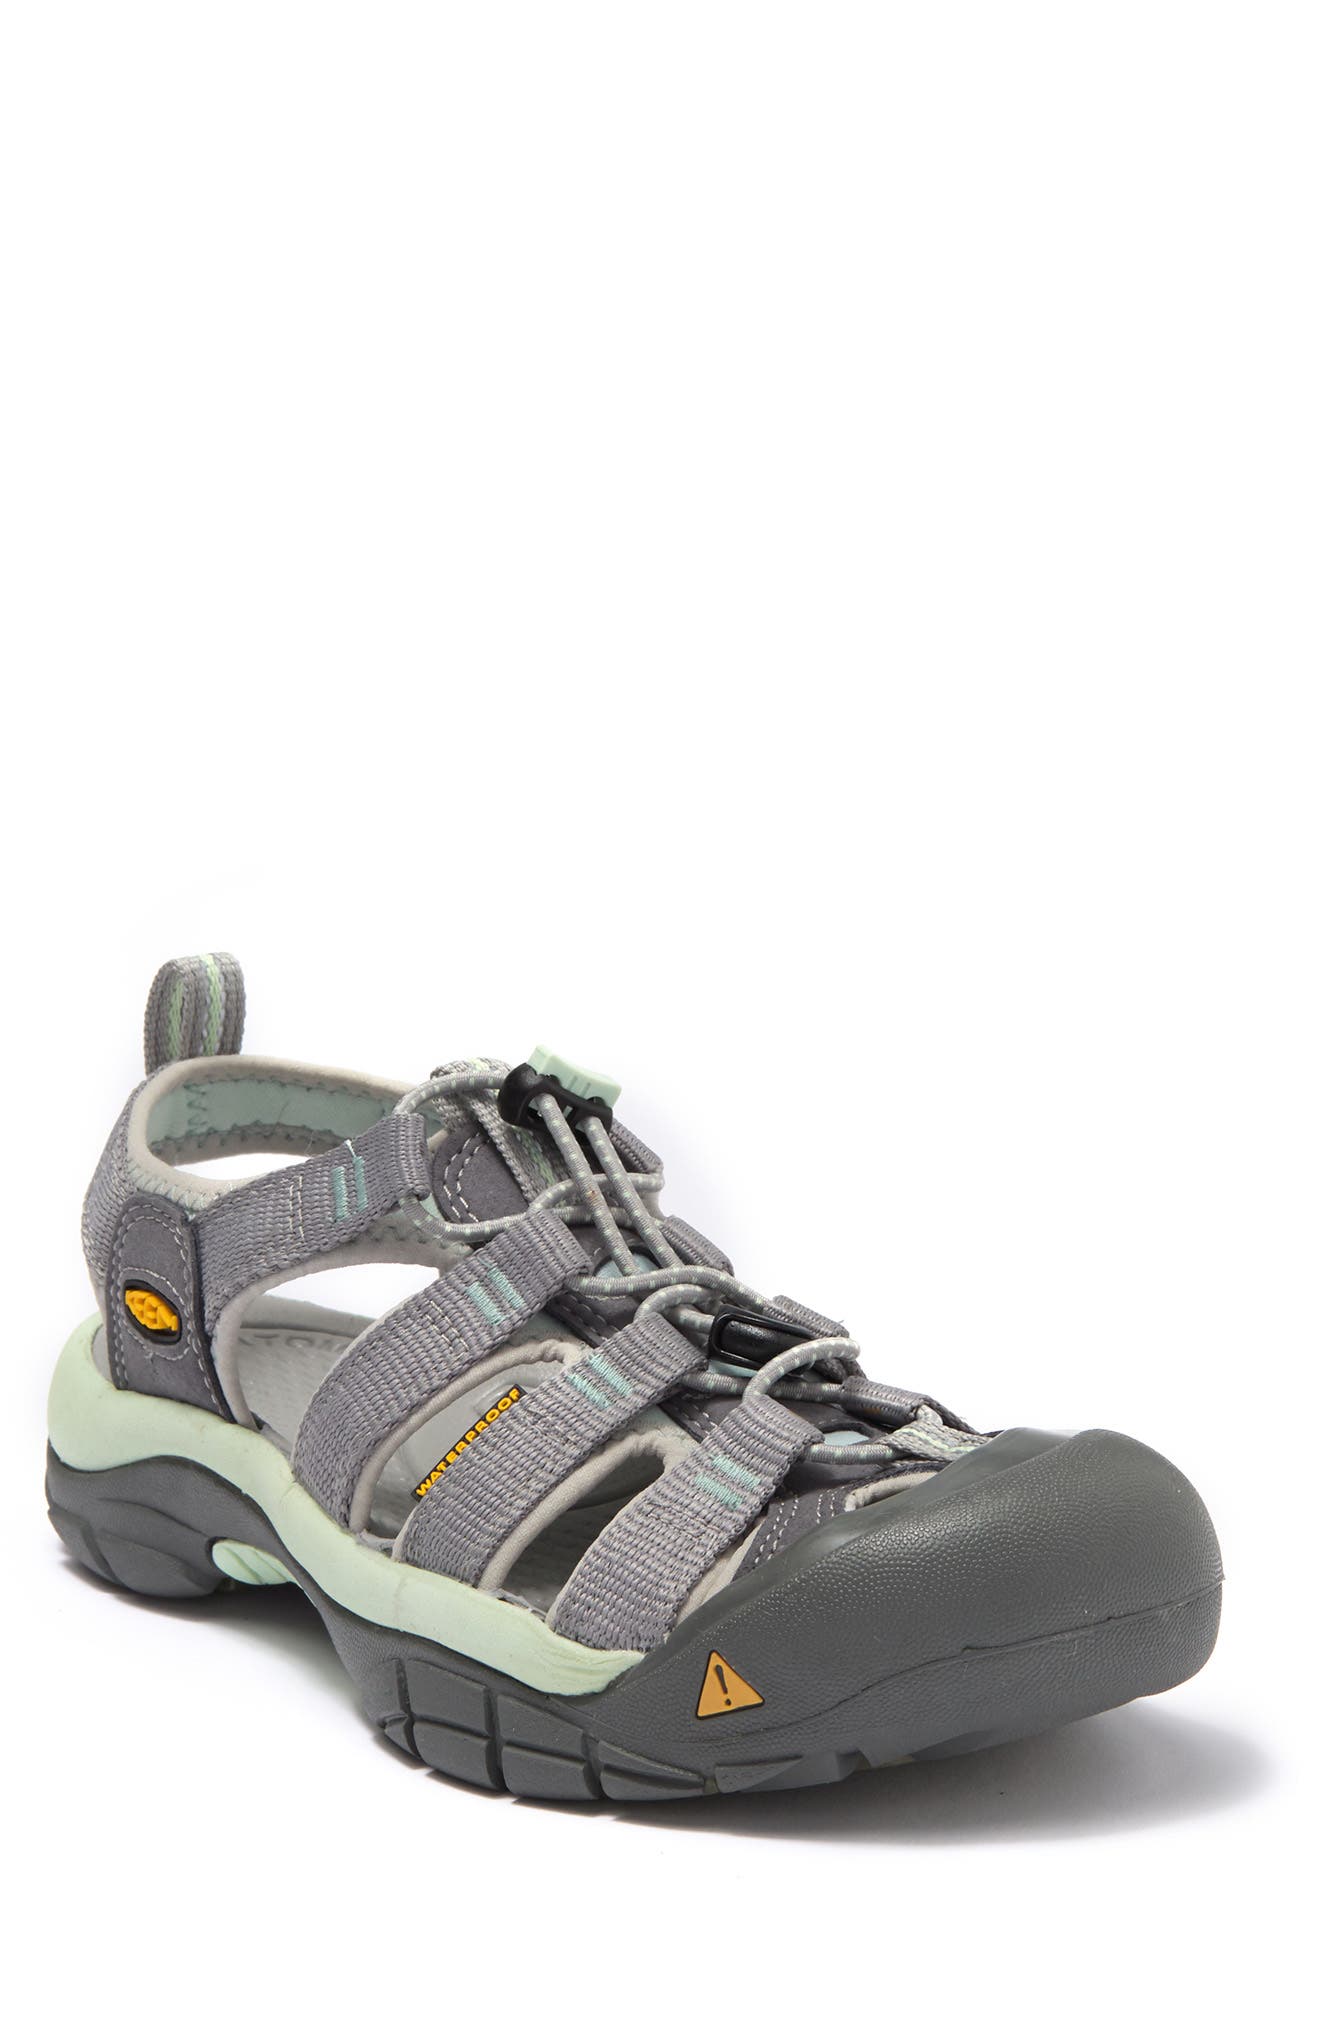 Keen Newport H2 Ex Hiking Water Sandal In Charcoal1